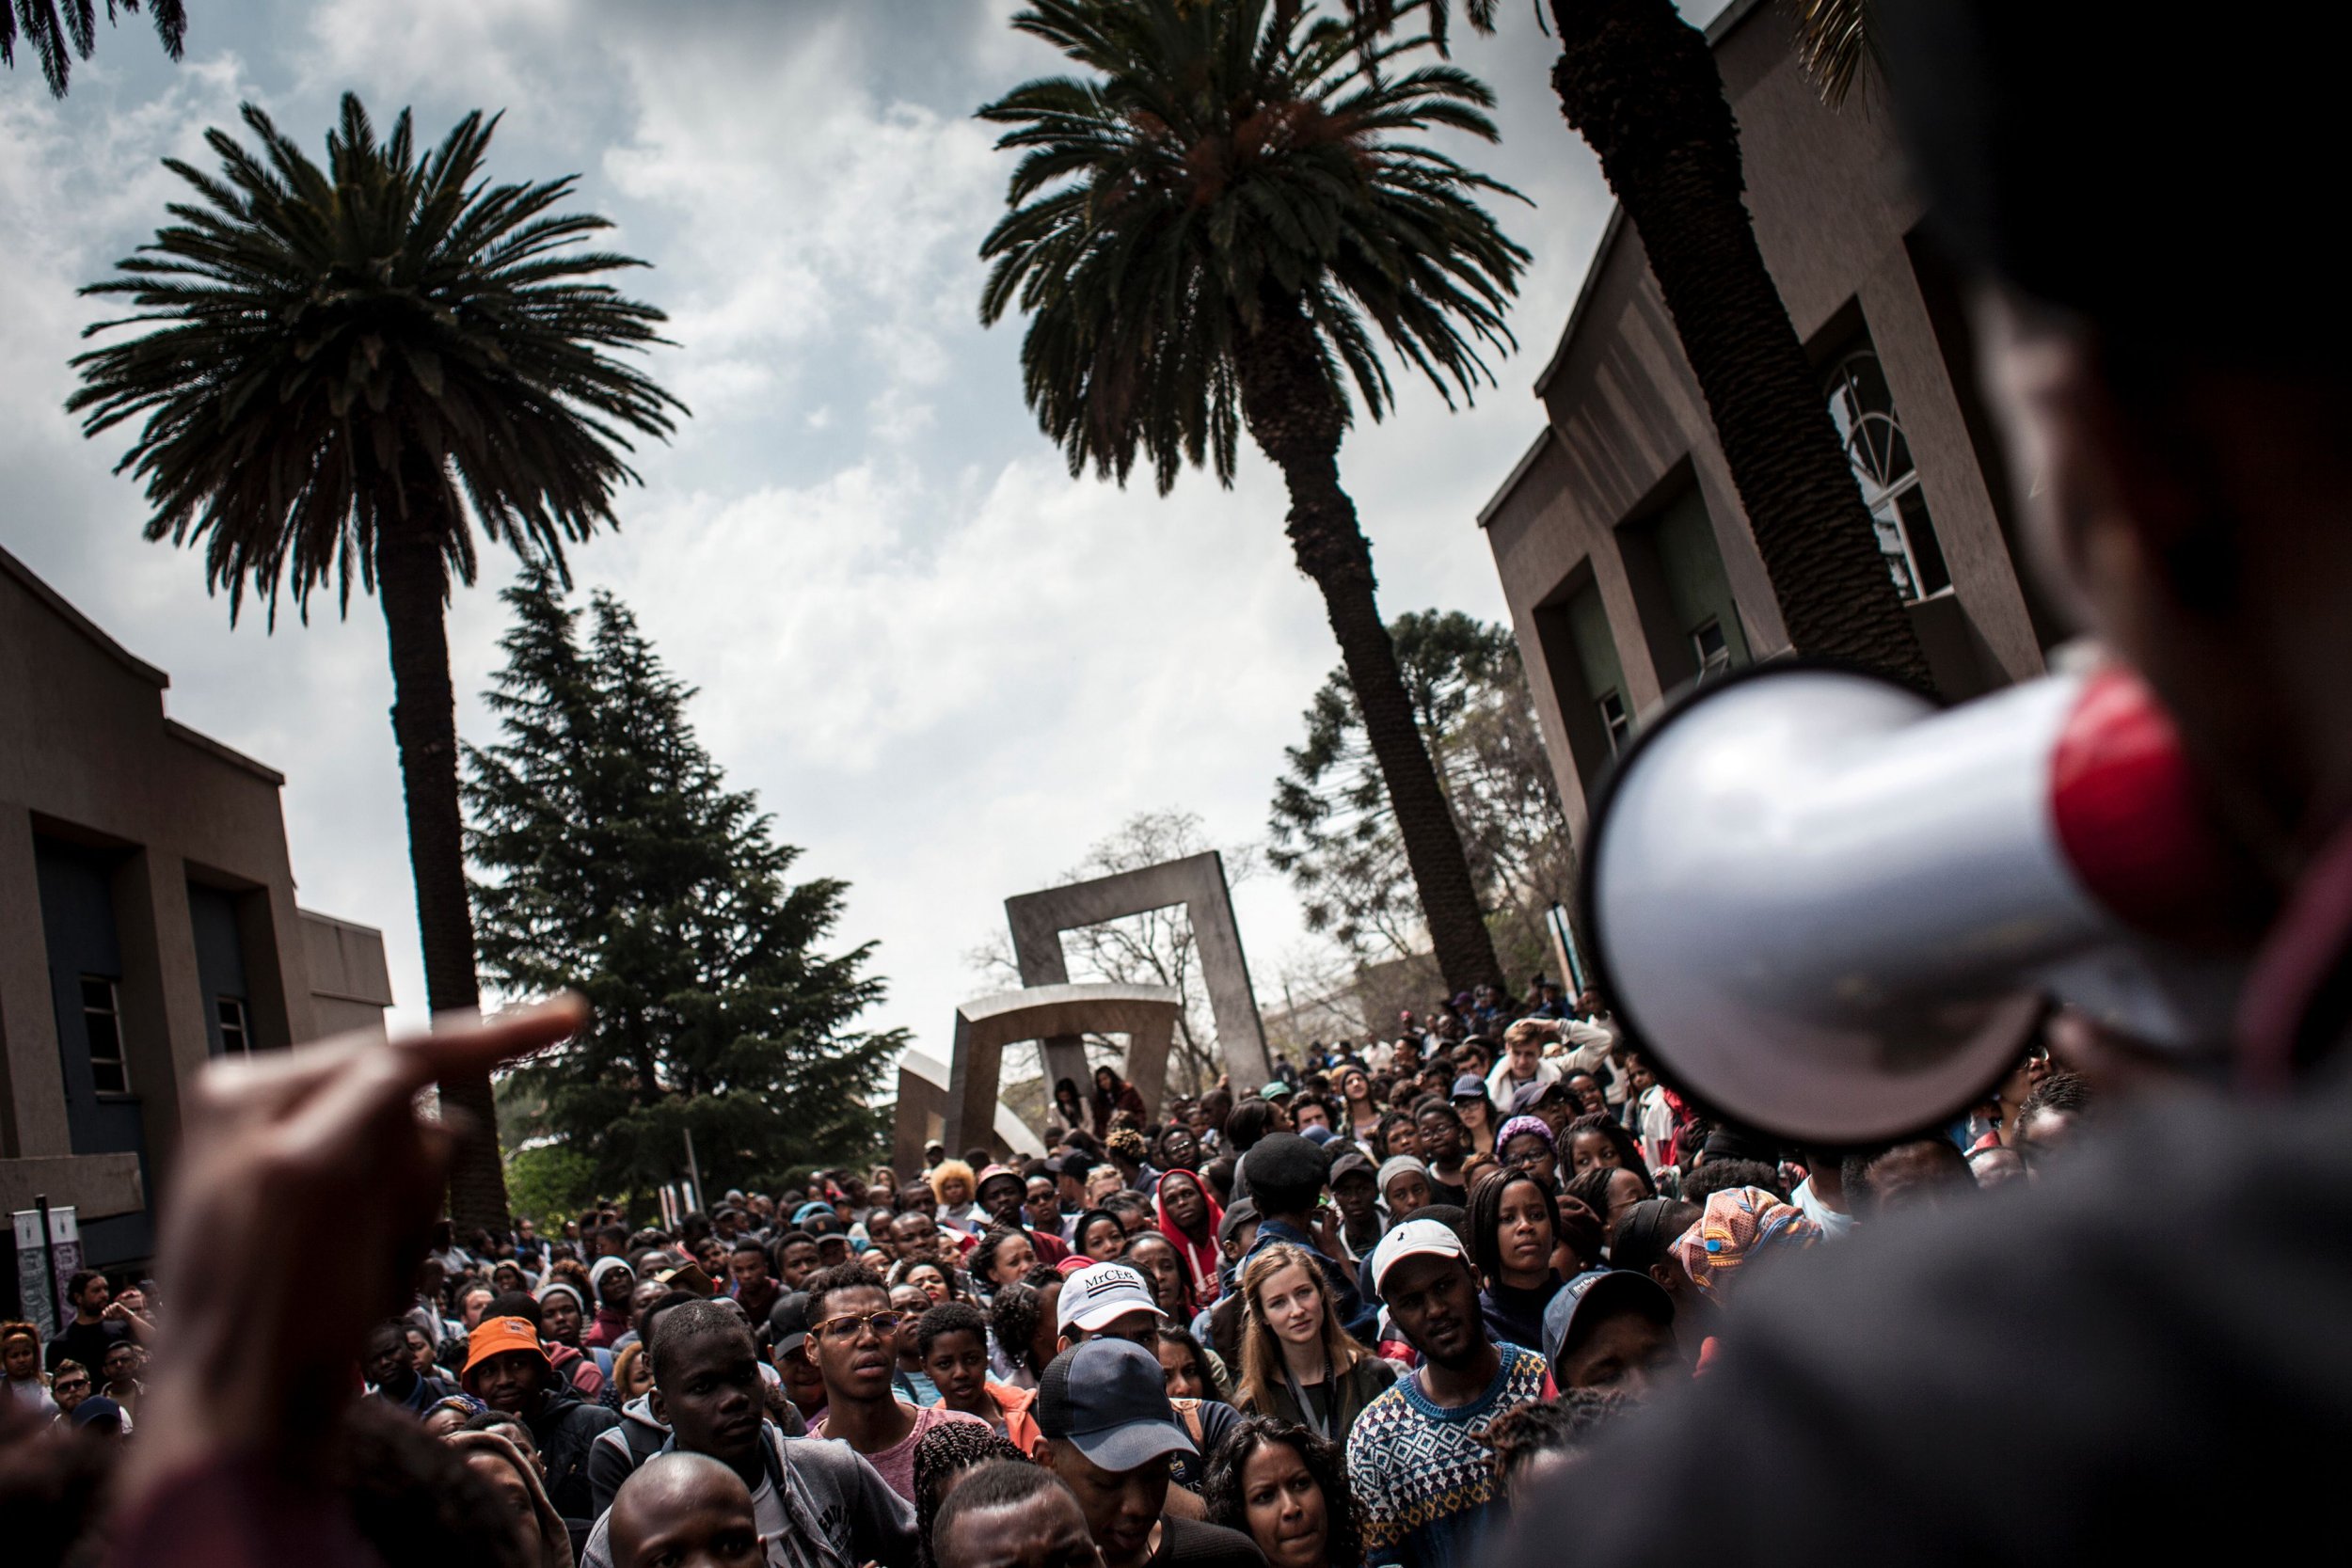 South Africa students protest